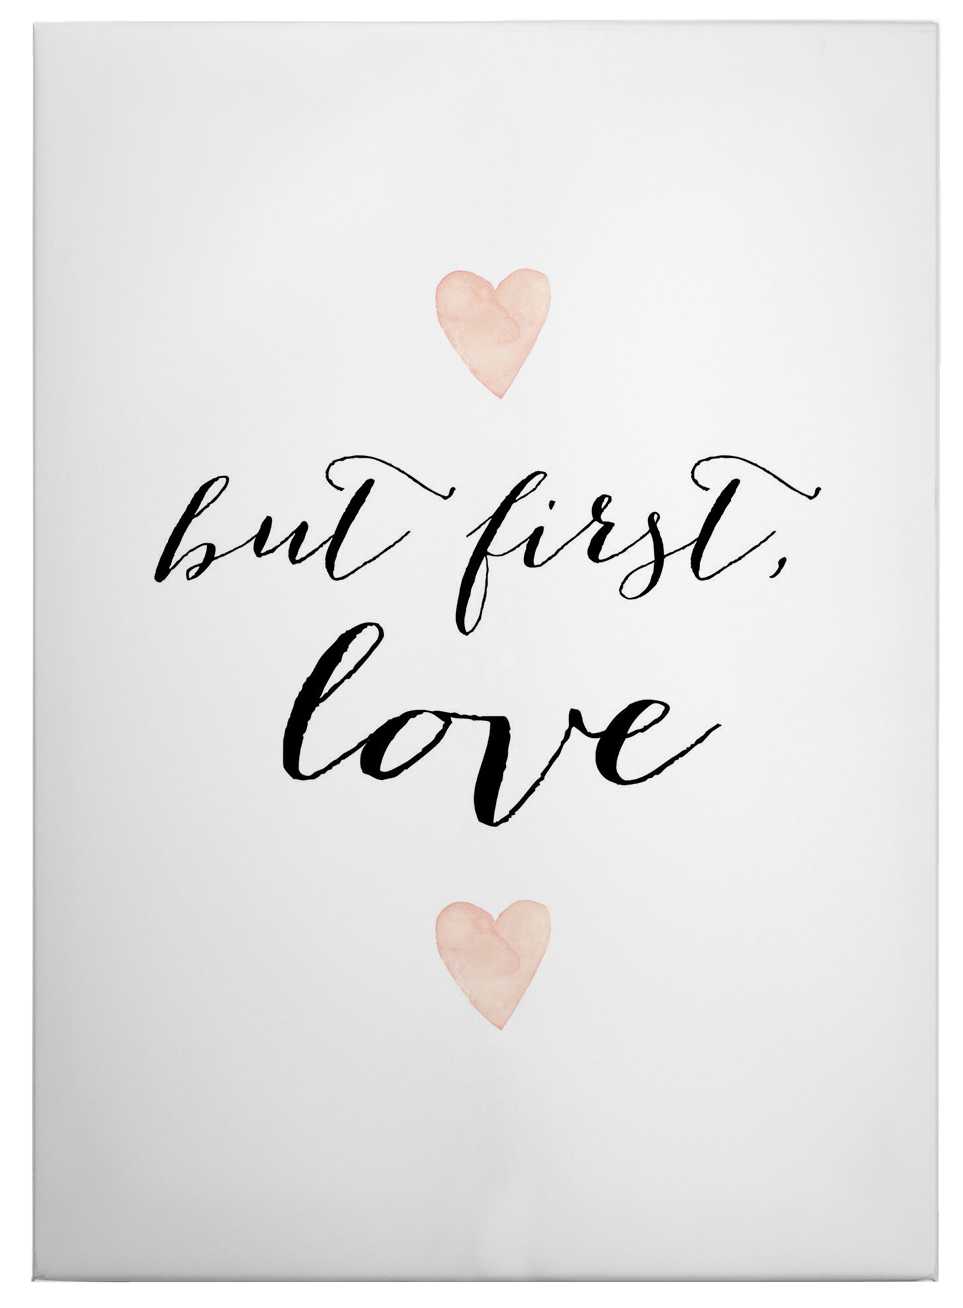             Canvas print saying but first love – black and white
        